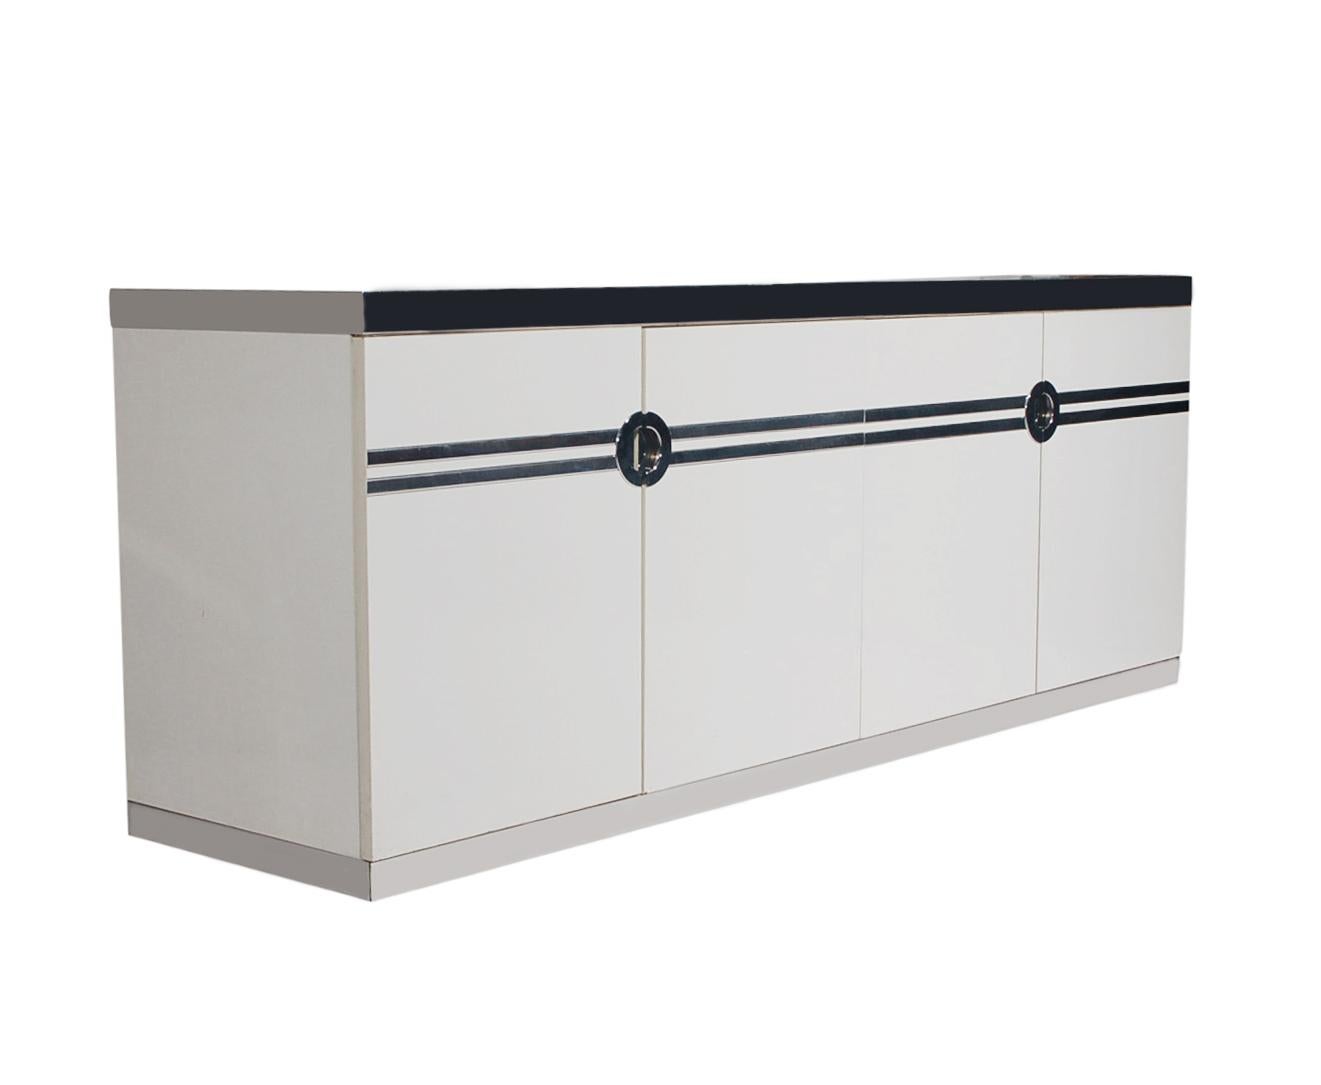 A sleek modern dresser or credenza designed by Pierre Cardin in the 1970s and produced in France. It features a white lacquer finish with polished steel trim in a Classic Art Deco design. It has 6 large interior pullout / pull-out drawers.